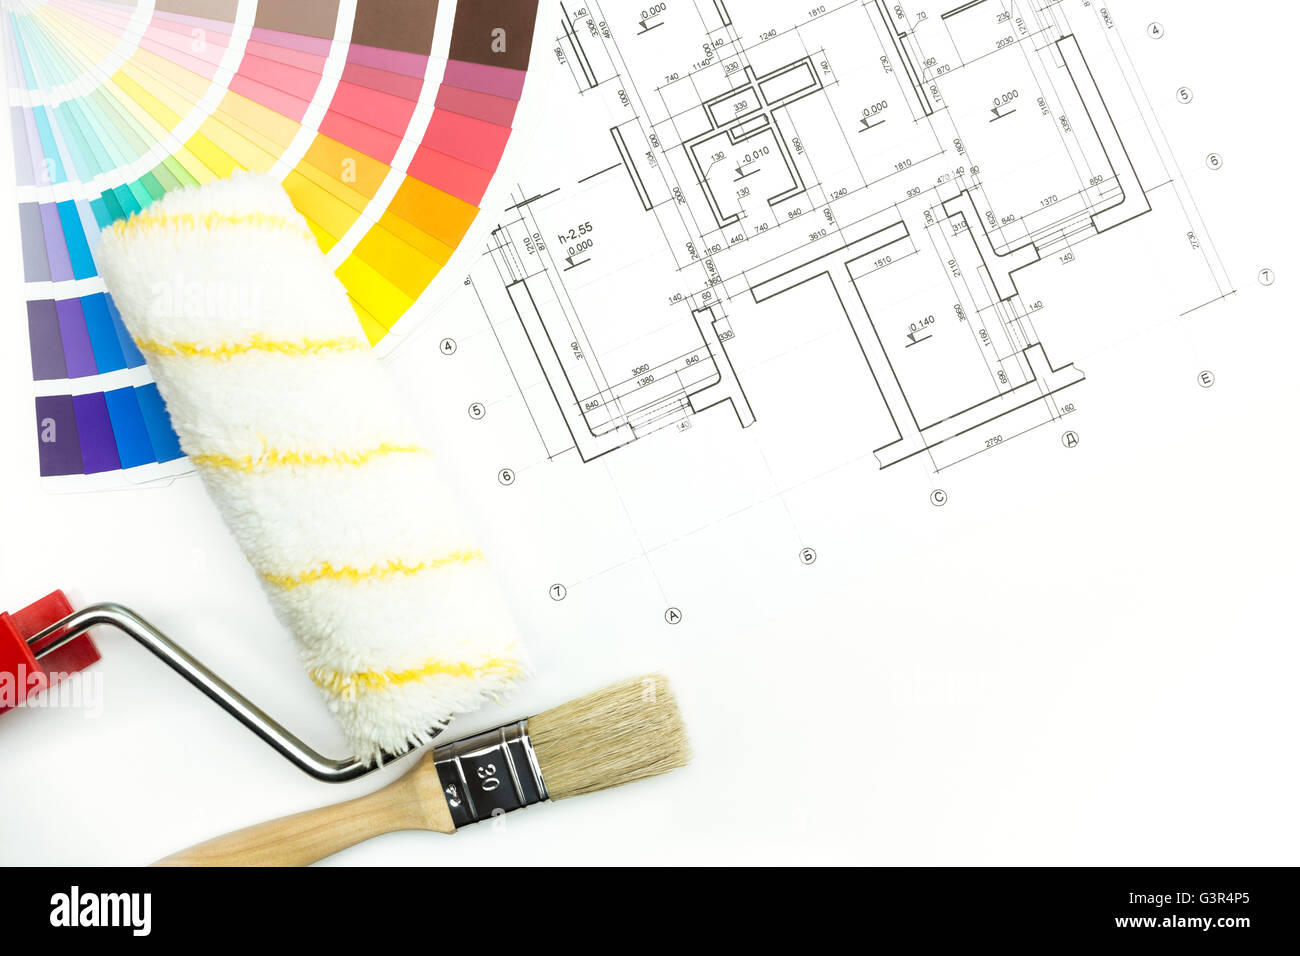 Paint roller, brush and color guide on architectural drawings background Stock Photo